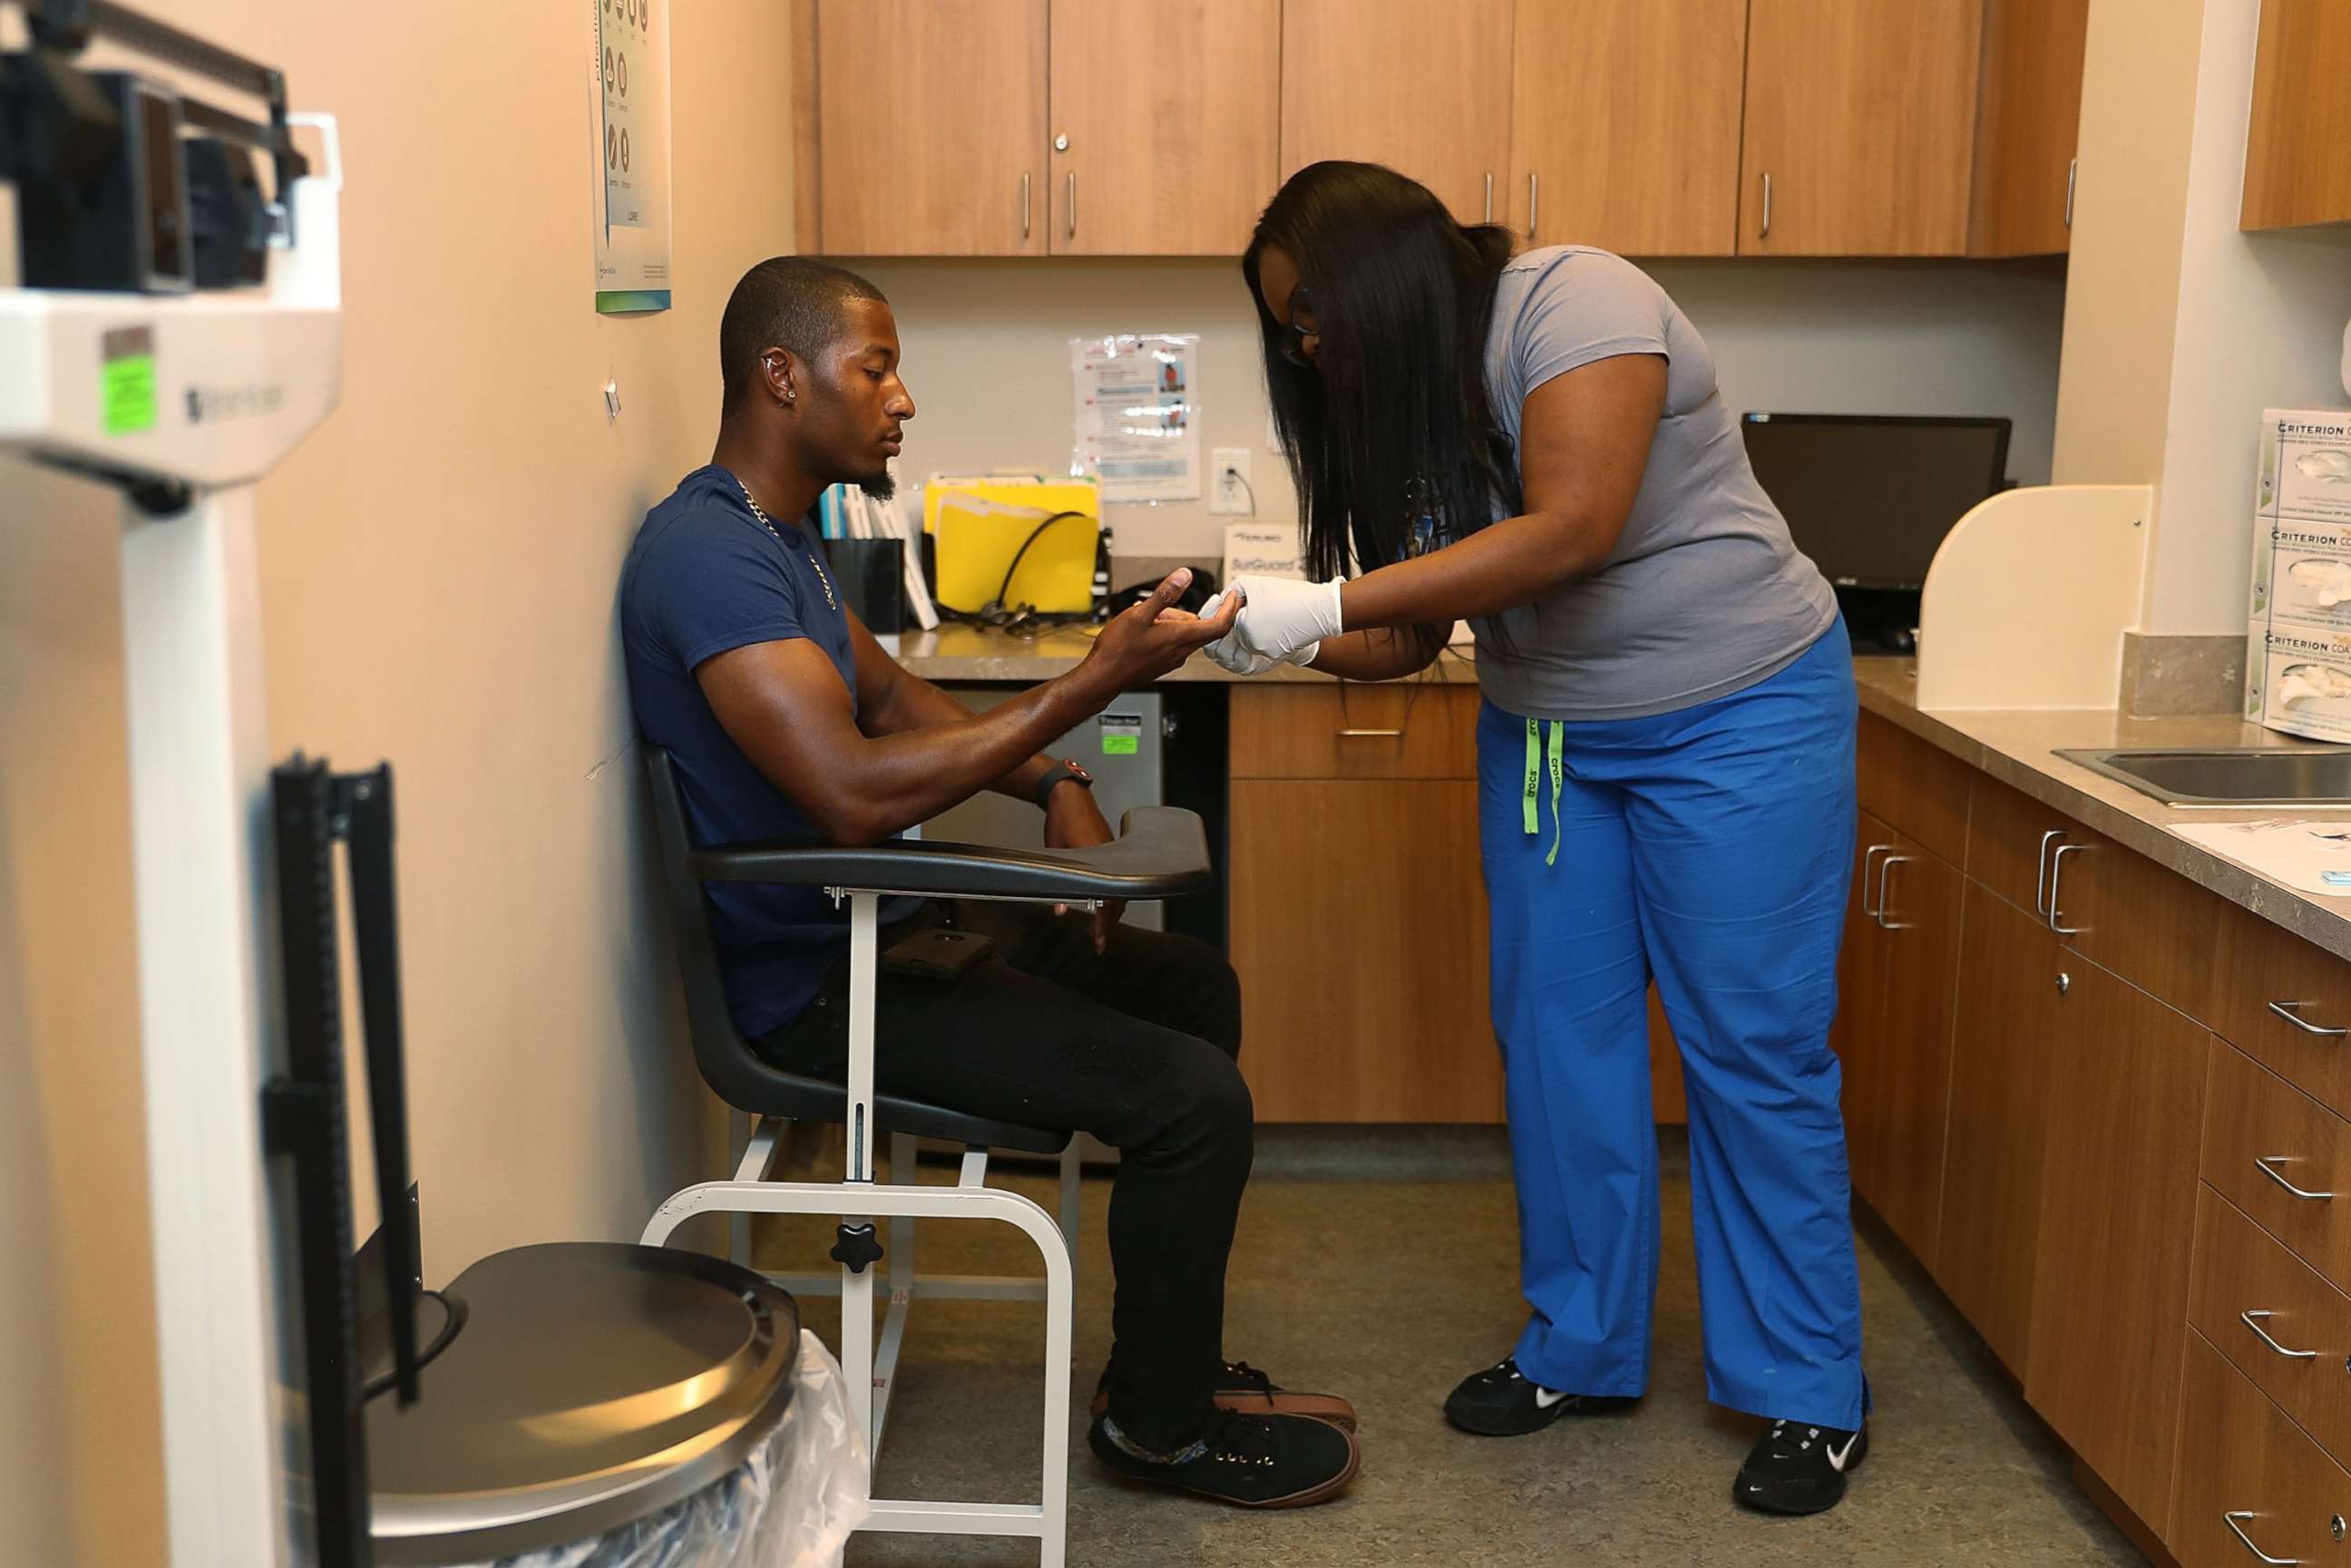 PHOTO: Jamal Wilson has blood drawn from a finger as he receives a free HIV test from a medical assistant in Miami, June 27, 2017.